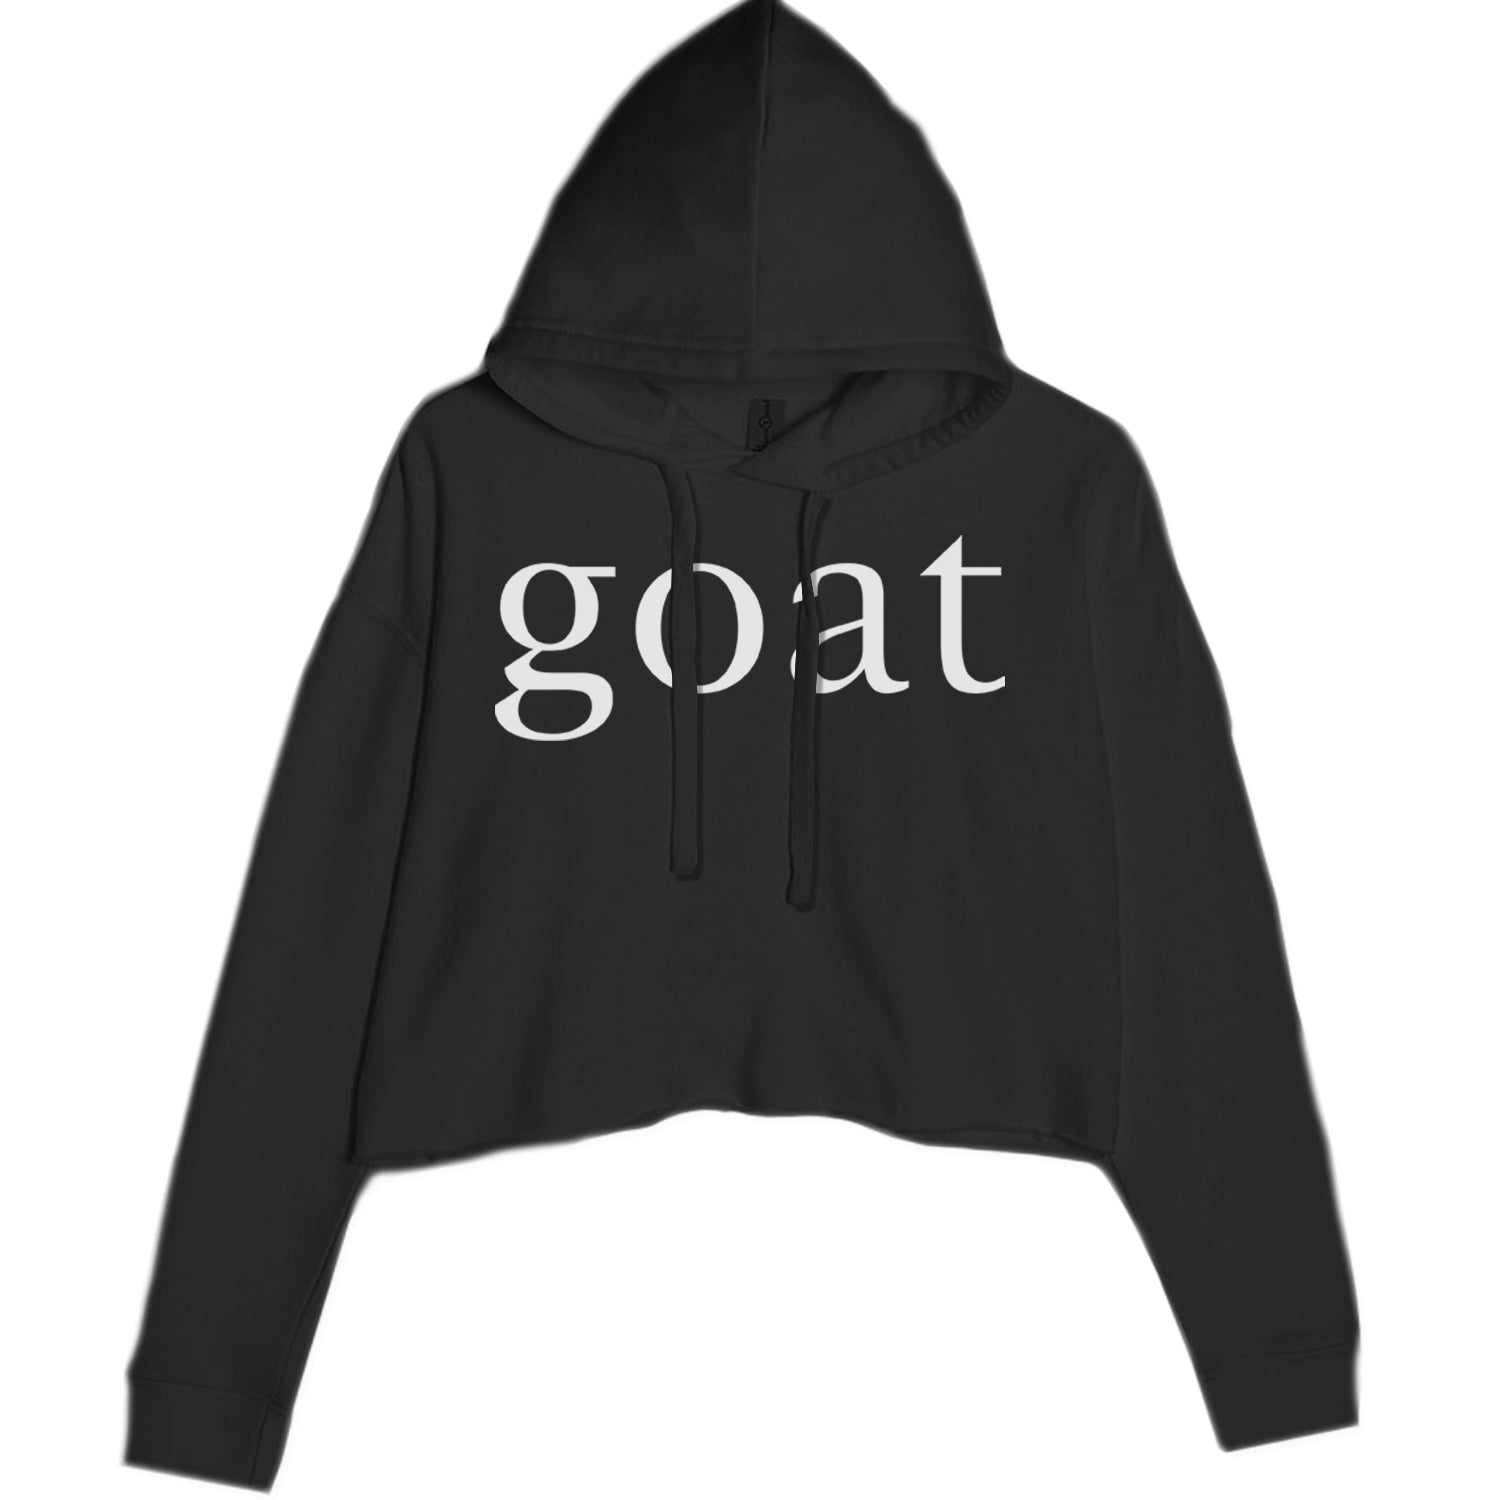 GOAT - Greatest Of All Time  Cropped Hoodie Sweatshirt Black